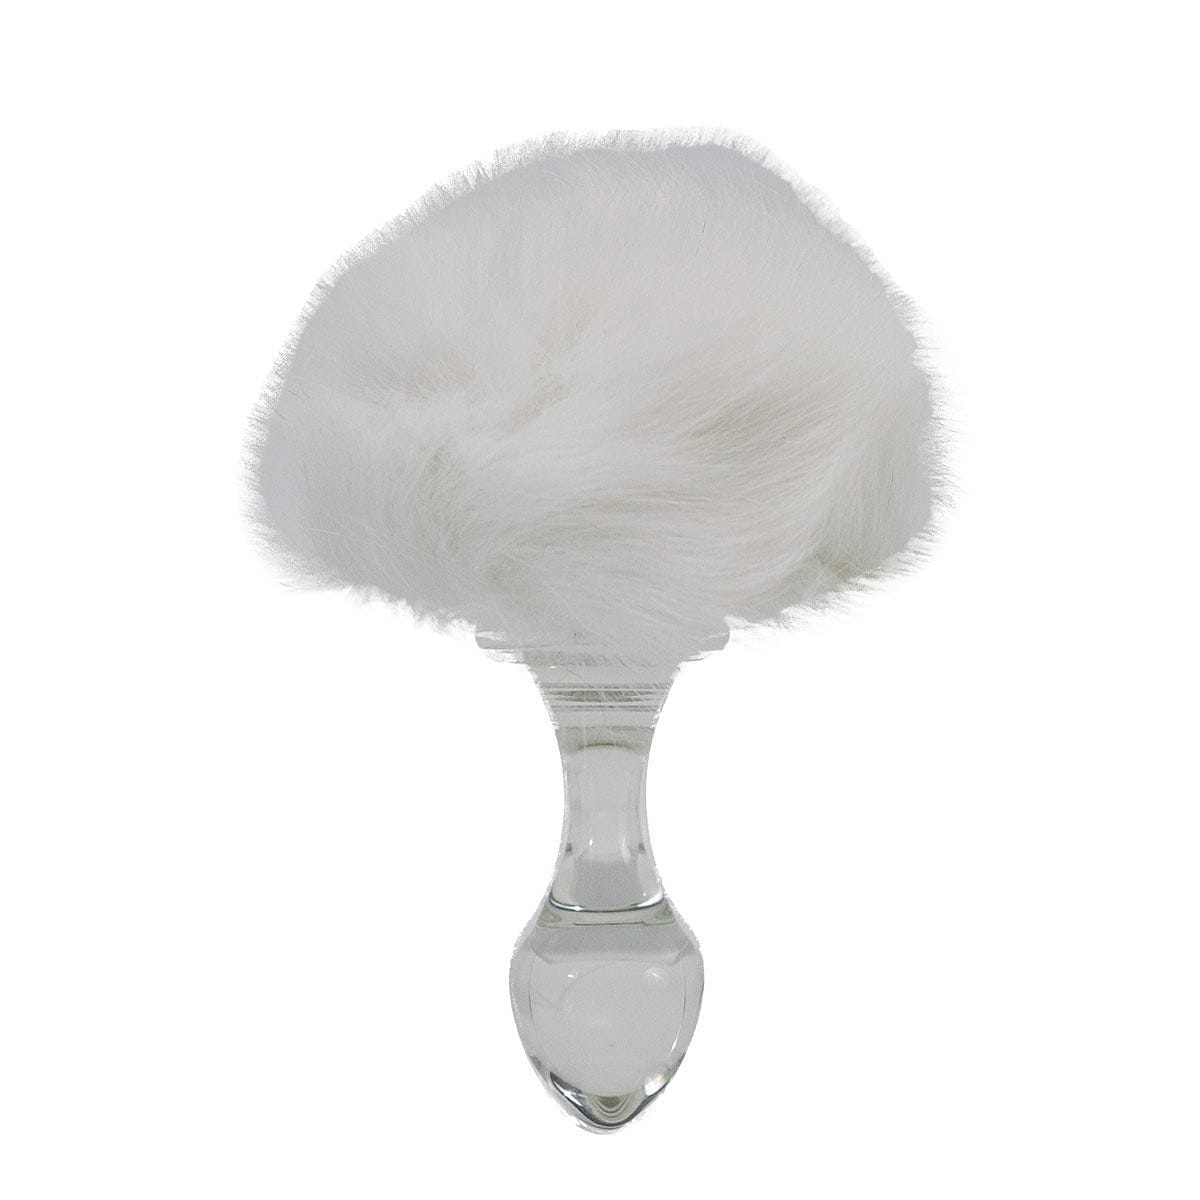 Glass Plug with Magnetic Bunny Tail by Crystal Delights - rolik